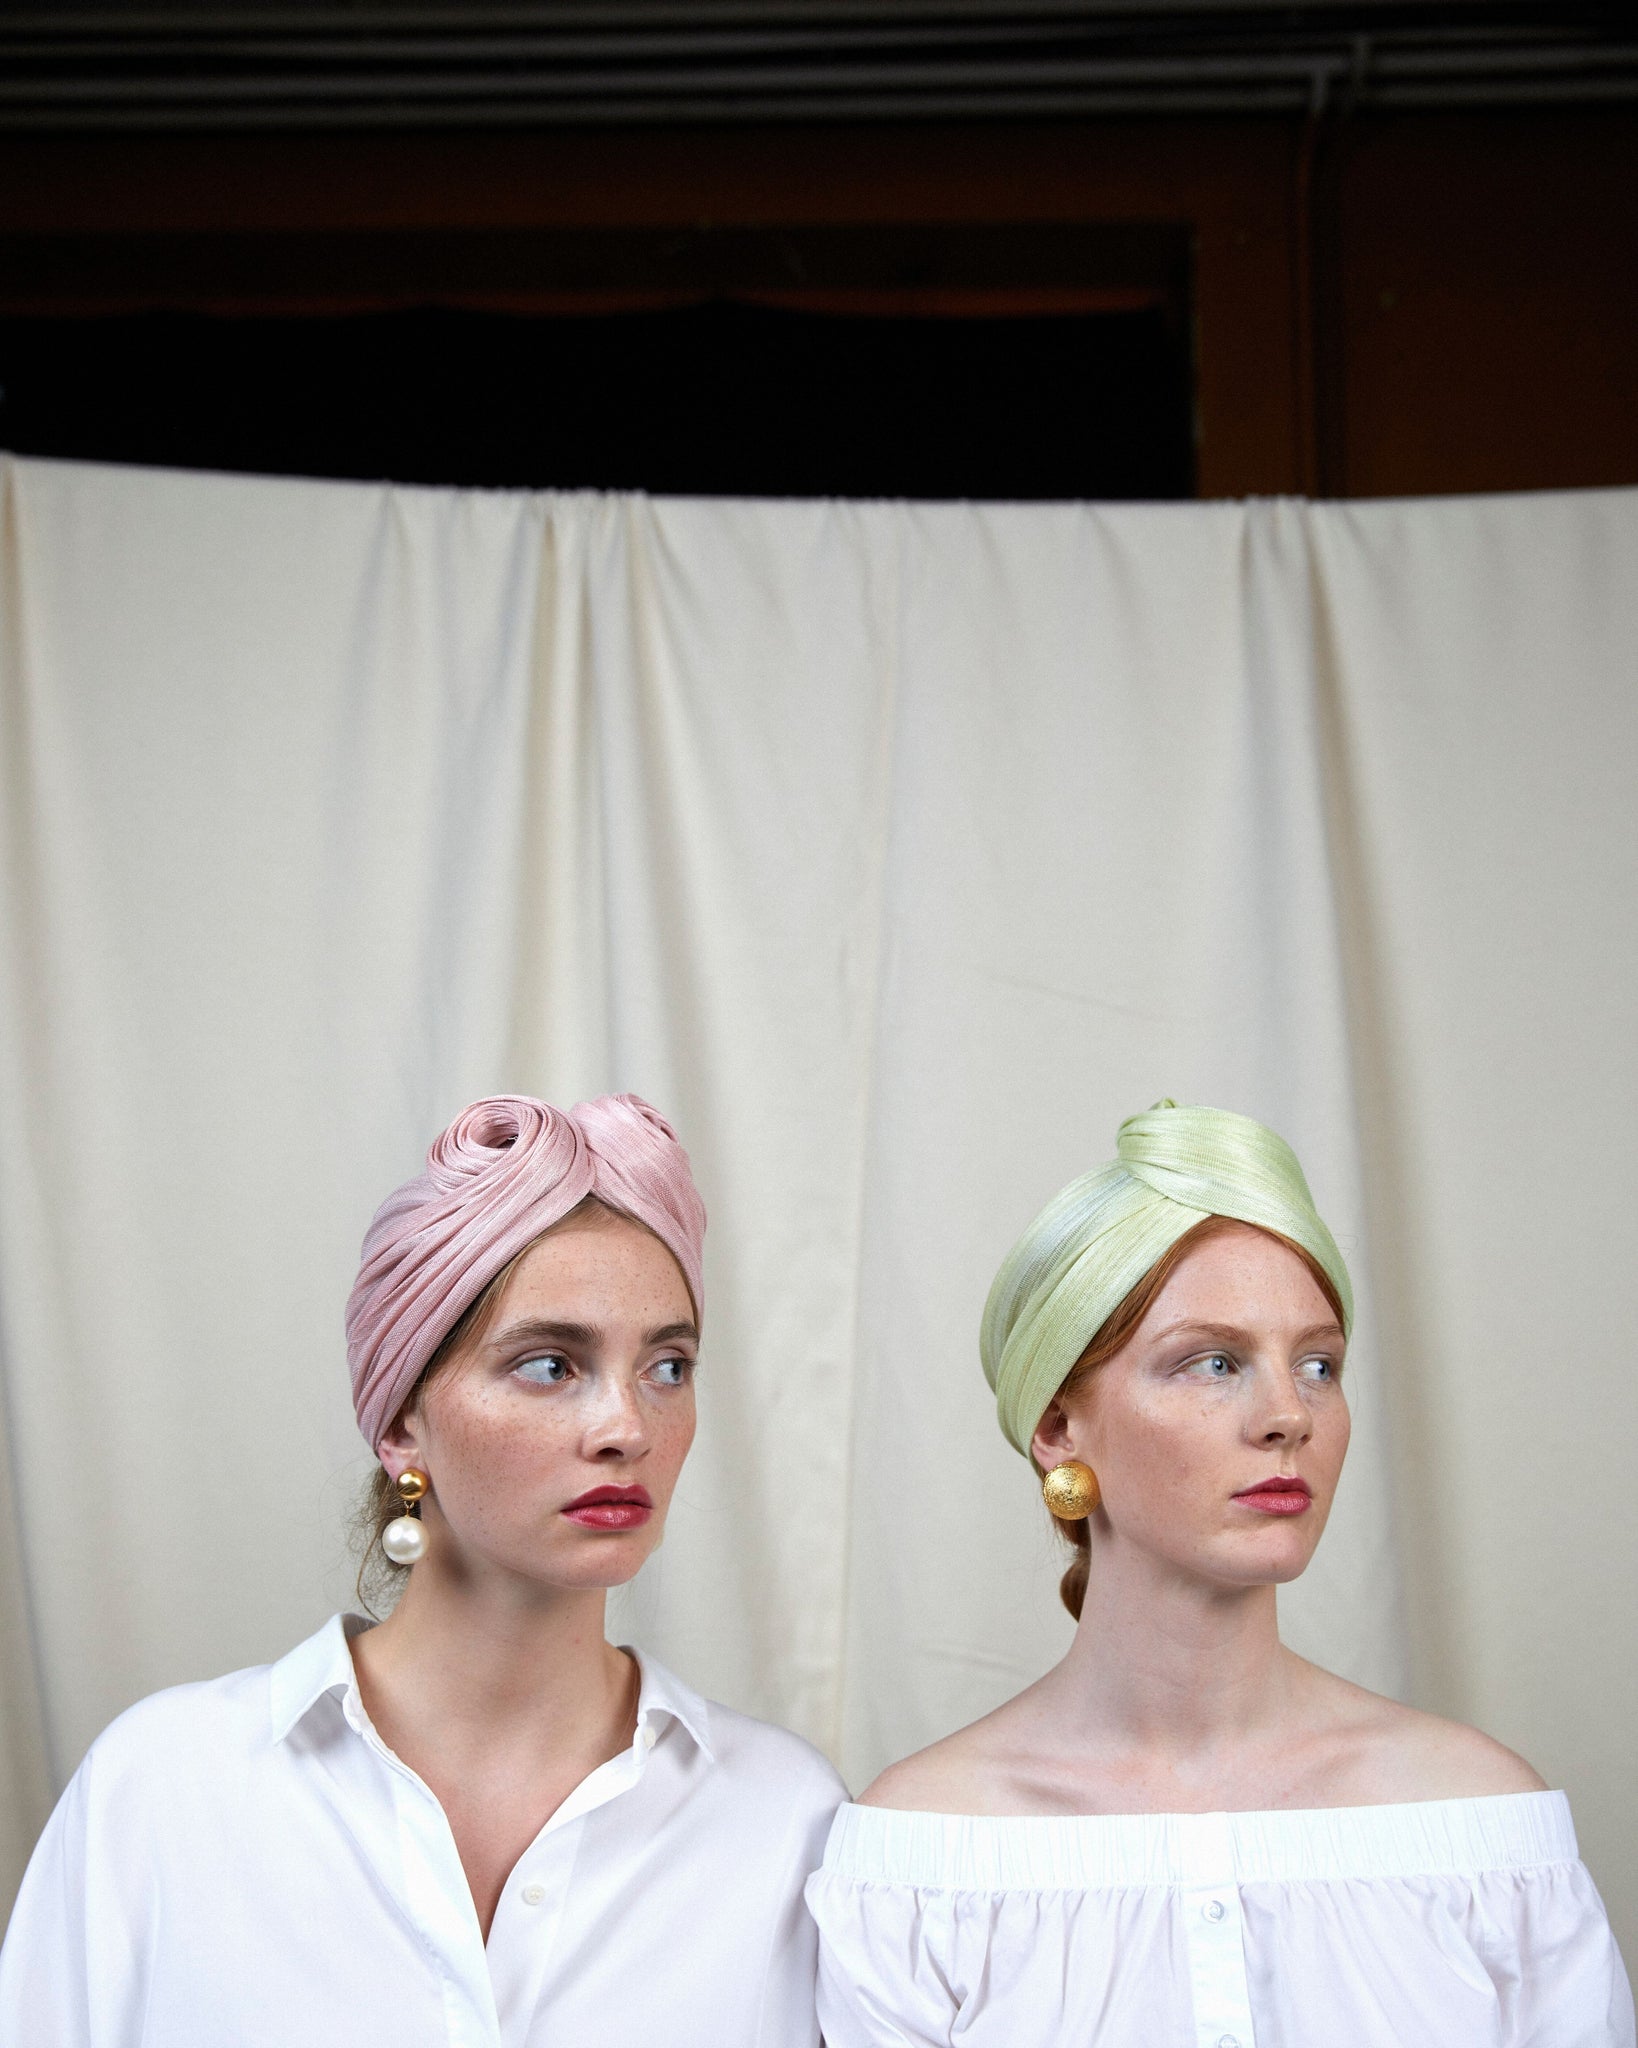 HEADQUARTER | couture headwear Musa turban, made of banana straw. Designed and handcrafted in Switzerland.